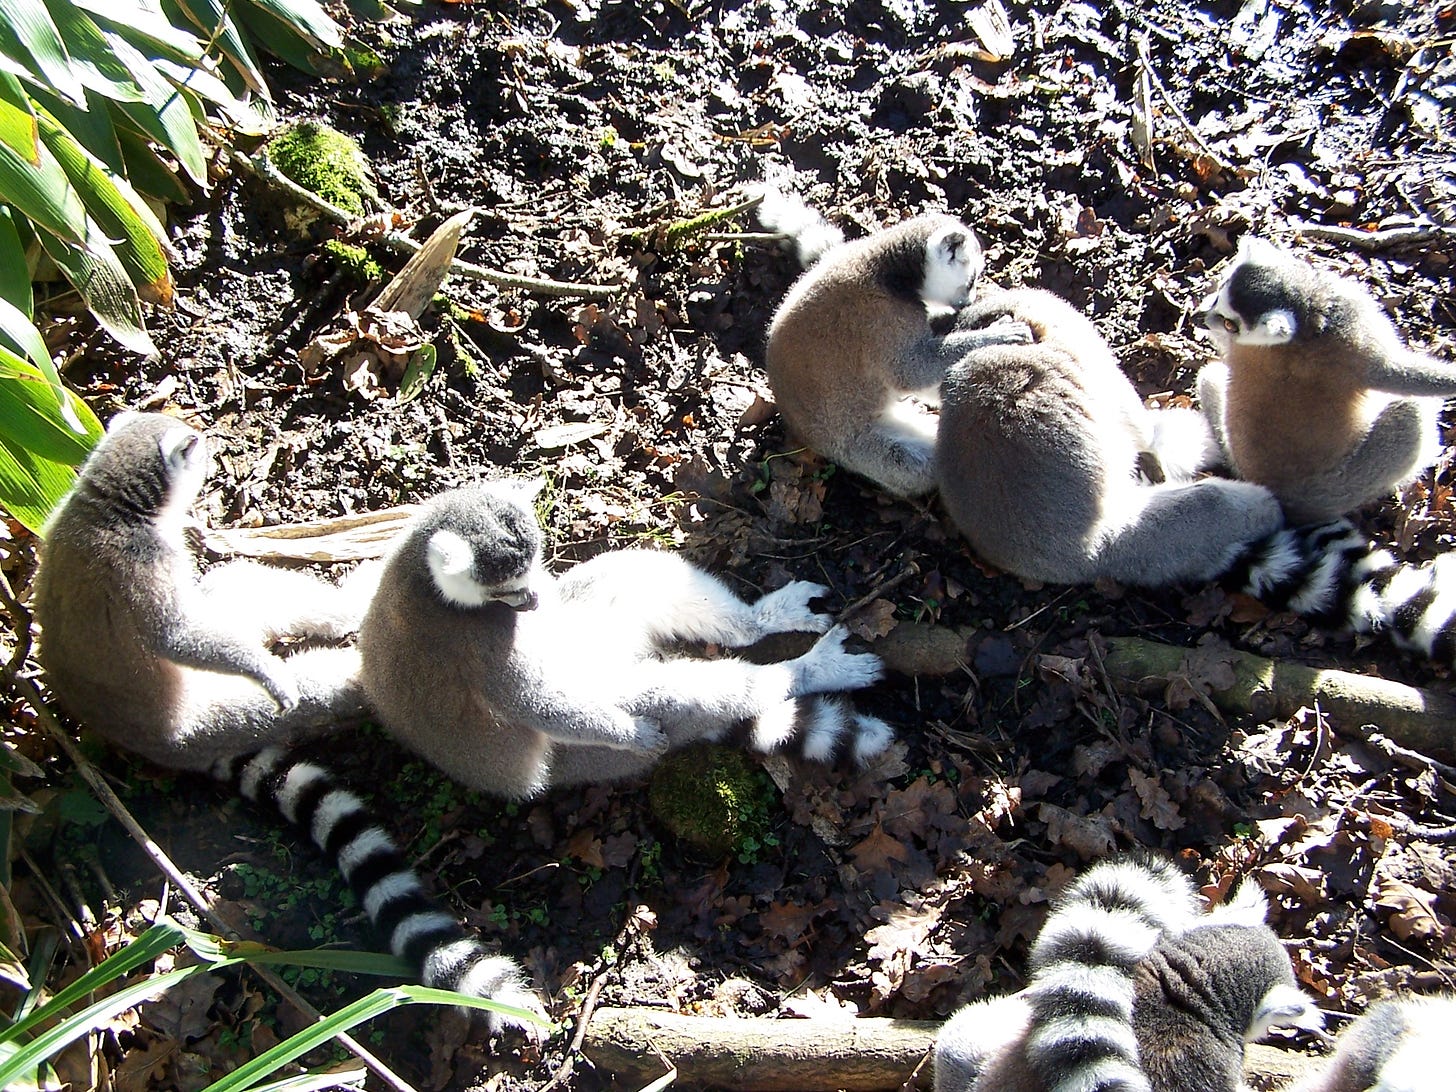 Five lemurs in the sun. One checked another for fleas, while a third looks on. The fourth and fifth display their fronts to the sun.